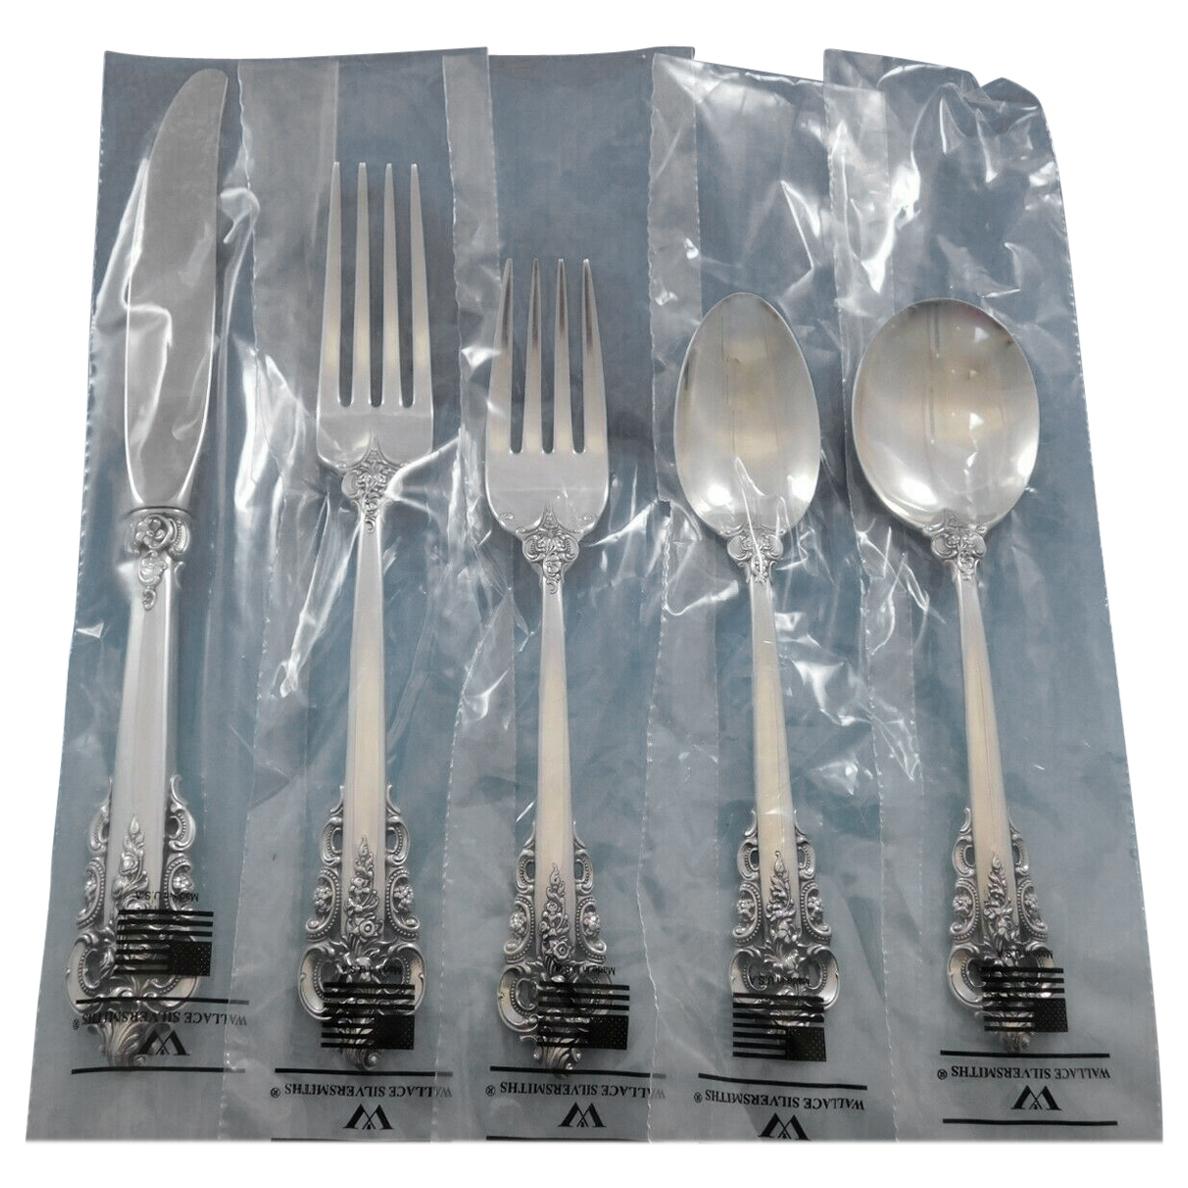 S GRAND VICTORIAN -7 3//4/" WALLACE STERLING PLACE FORK